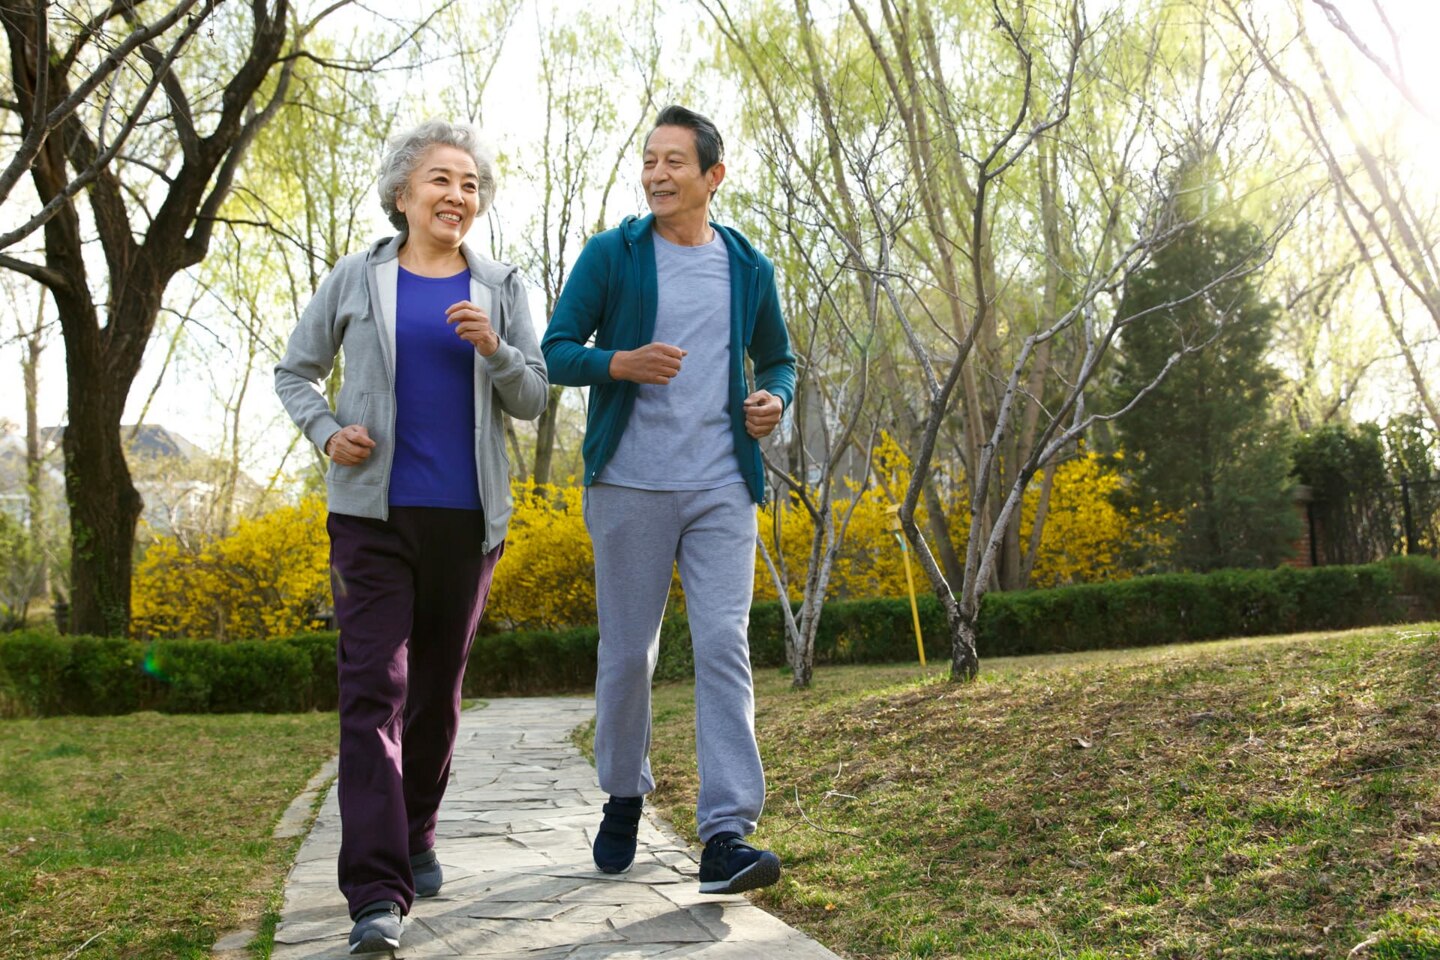 Senior couple jogging in a park during spring.